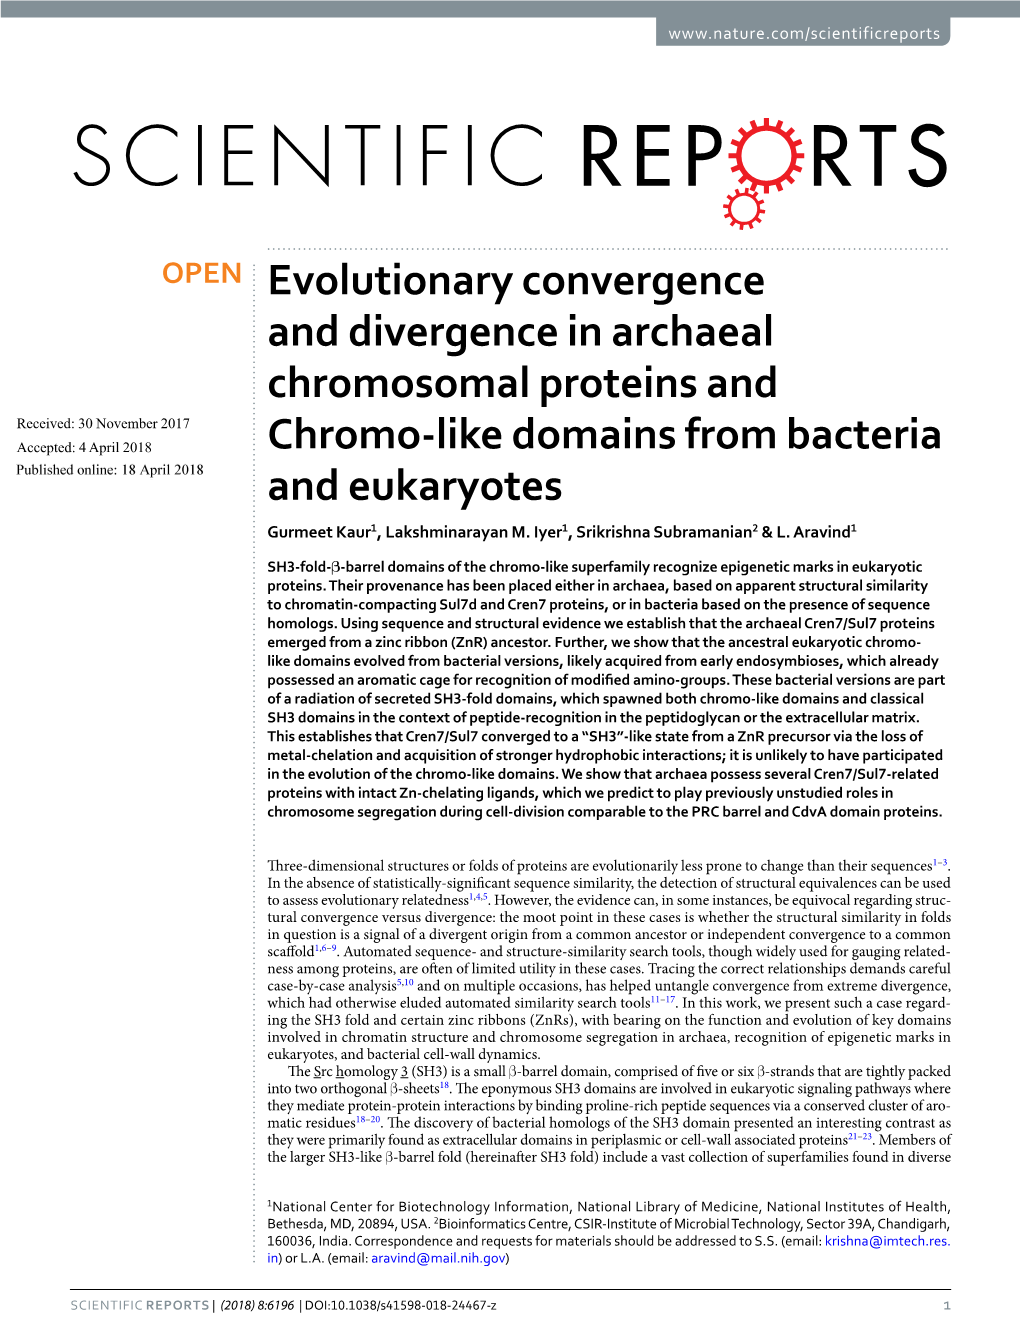 Evolutionary Convergence and Divergence in Archaeal